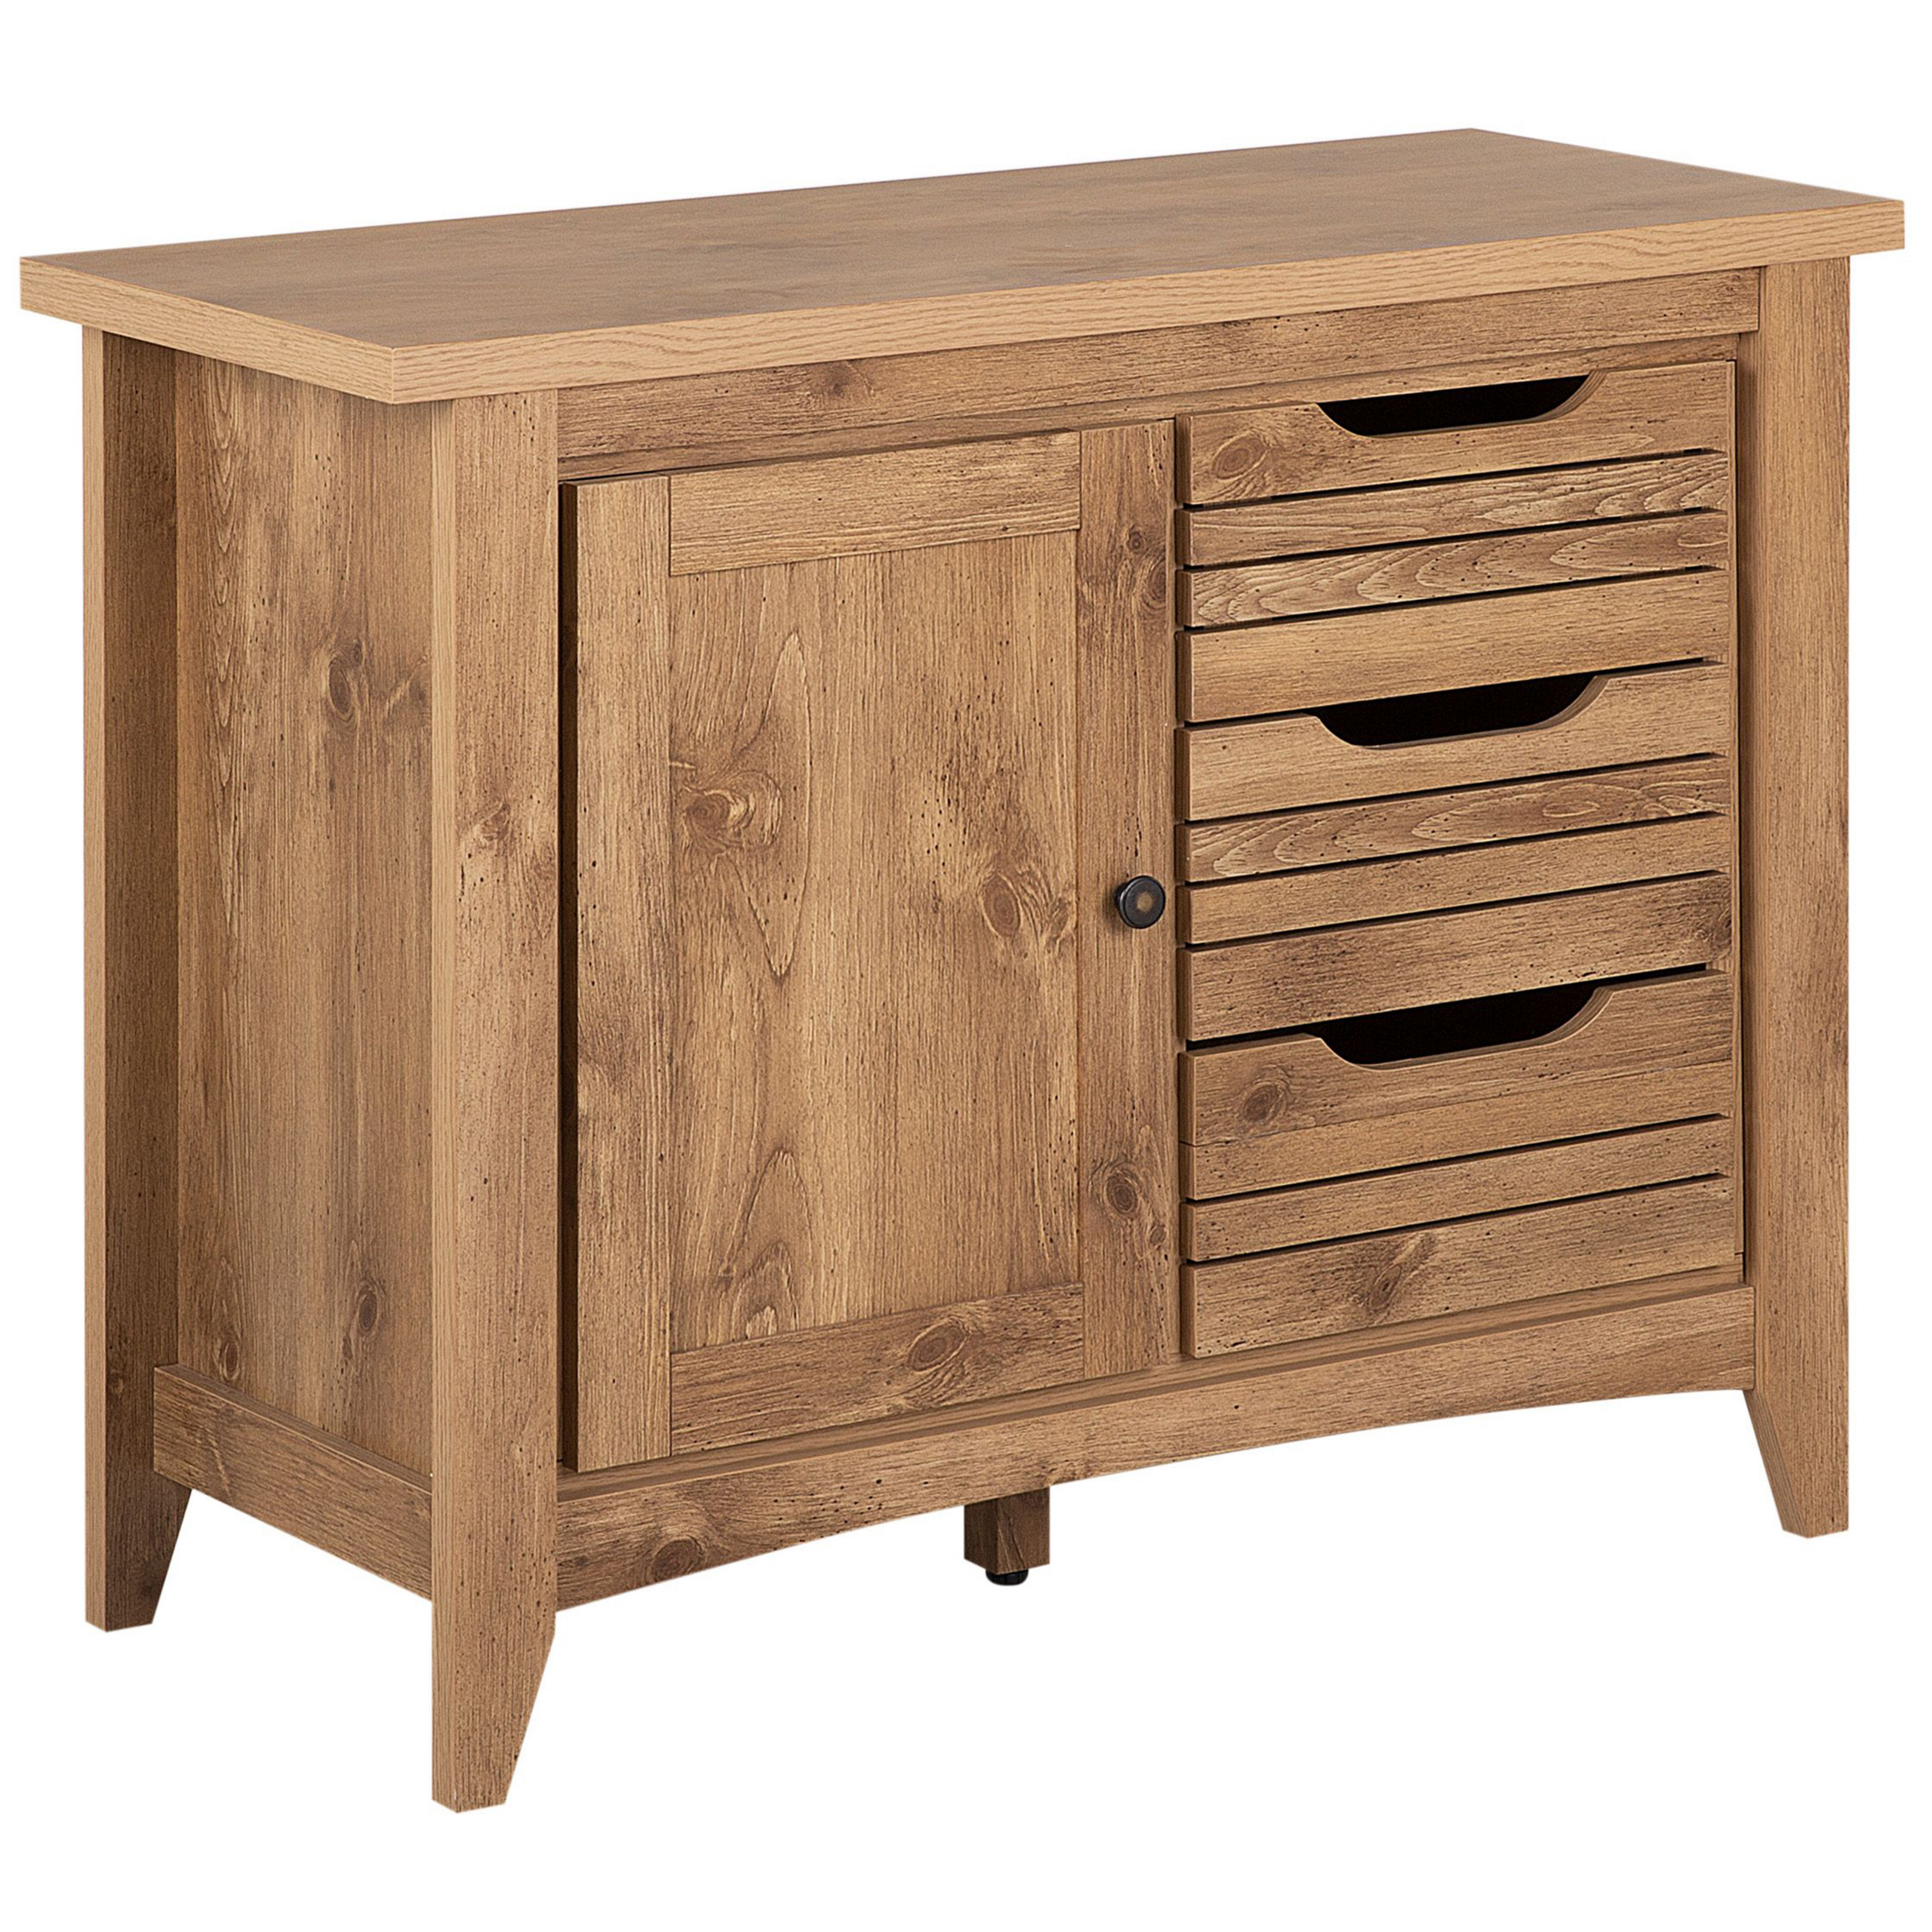 Beliani Sideboard Light Wood Effect 80 x 99 x43 cm 1 Cabinet Chest of 3 Drawers